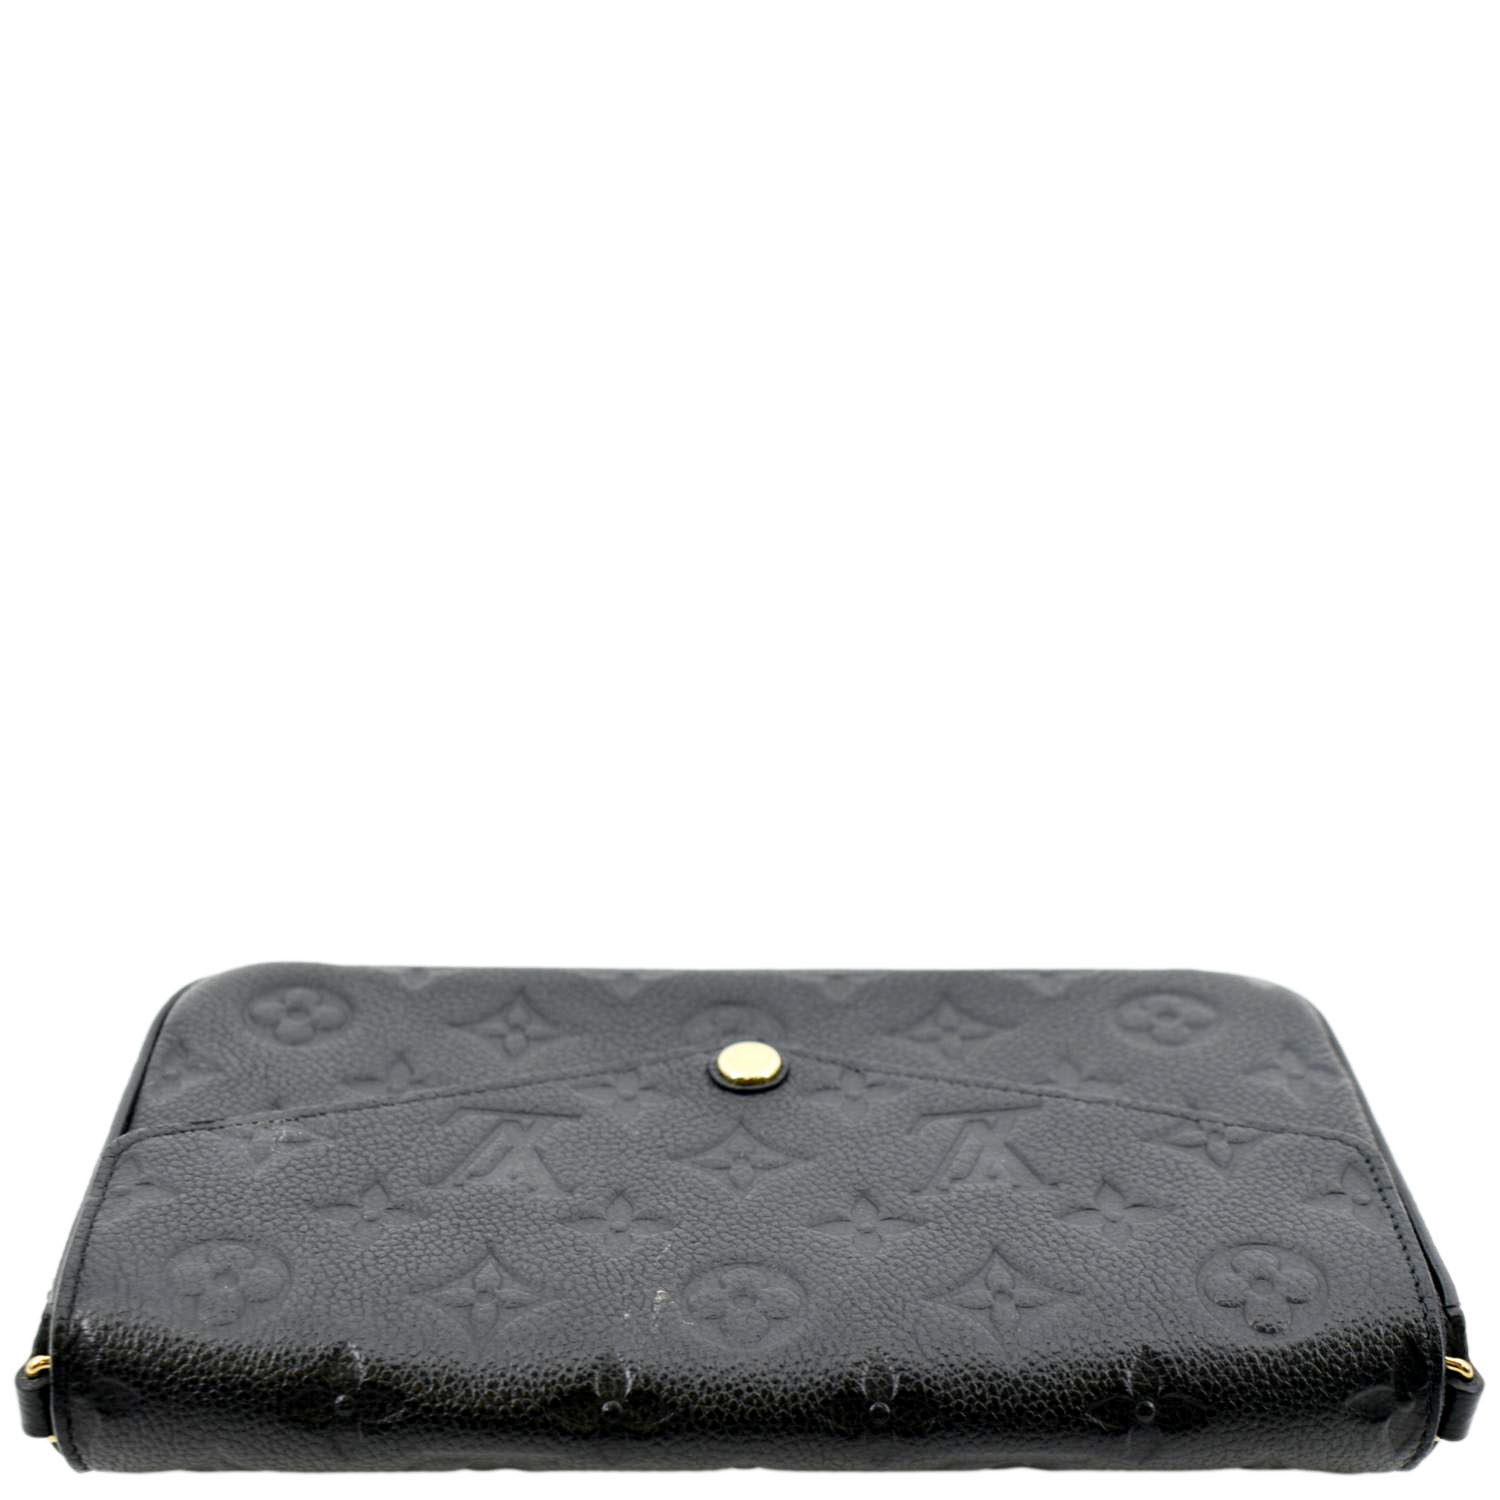 Shoulder Bag And Pouch FELICIE POCHETTE Dove Grey Empreinte Leather With  Bold Cream Flower Print Envelope Detachable Black Gold Chain 3 Multi Clutch POCHETTE  FELICIE 69977 From Bagbag051, $28.36